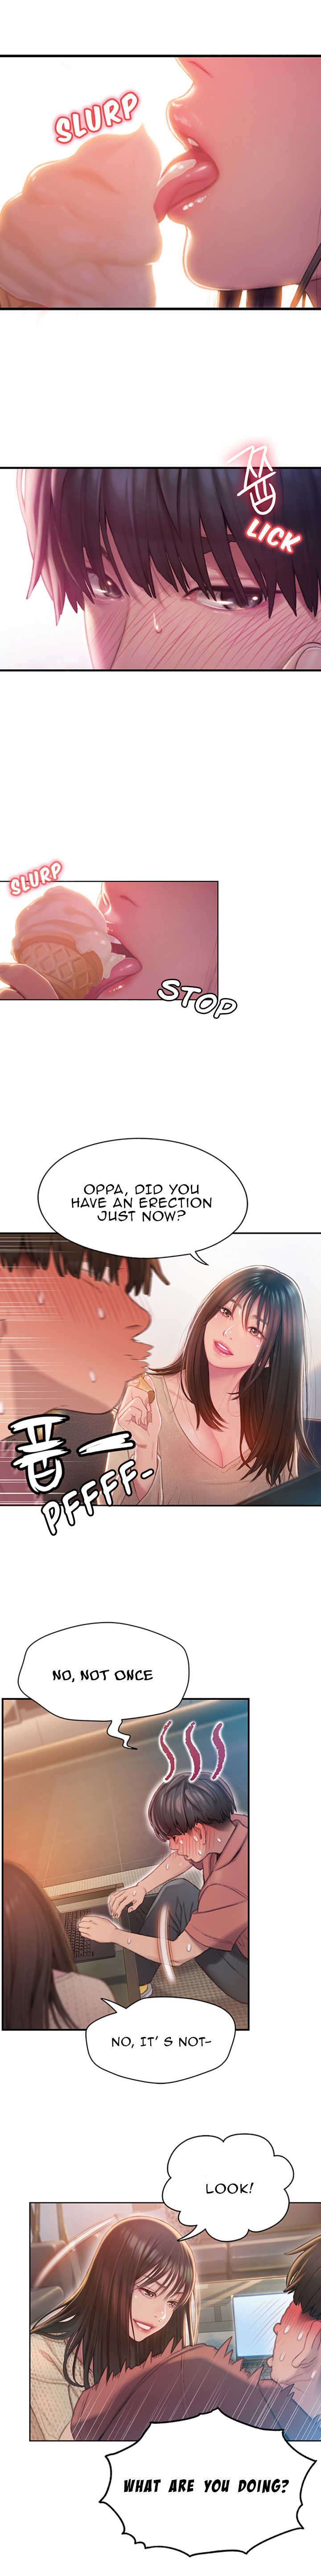 [Park Hyeongjun] Love Limit Exceeded V.2 (01-09) (Ongoing) - Page 3